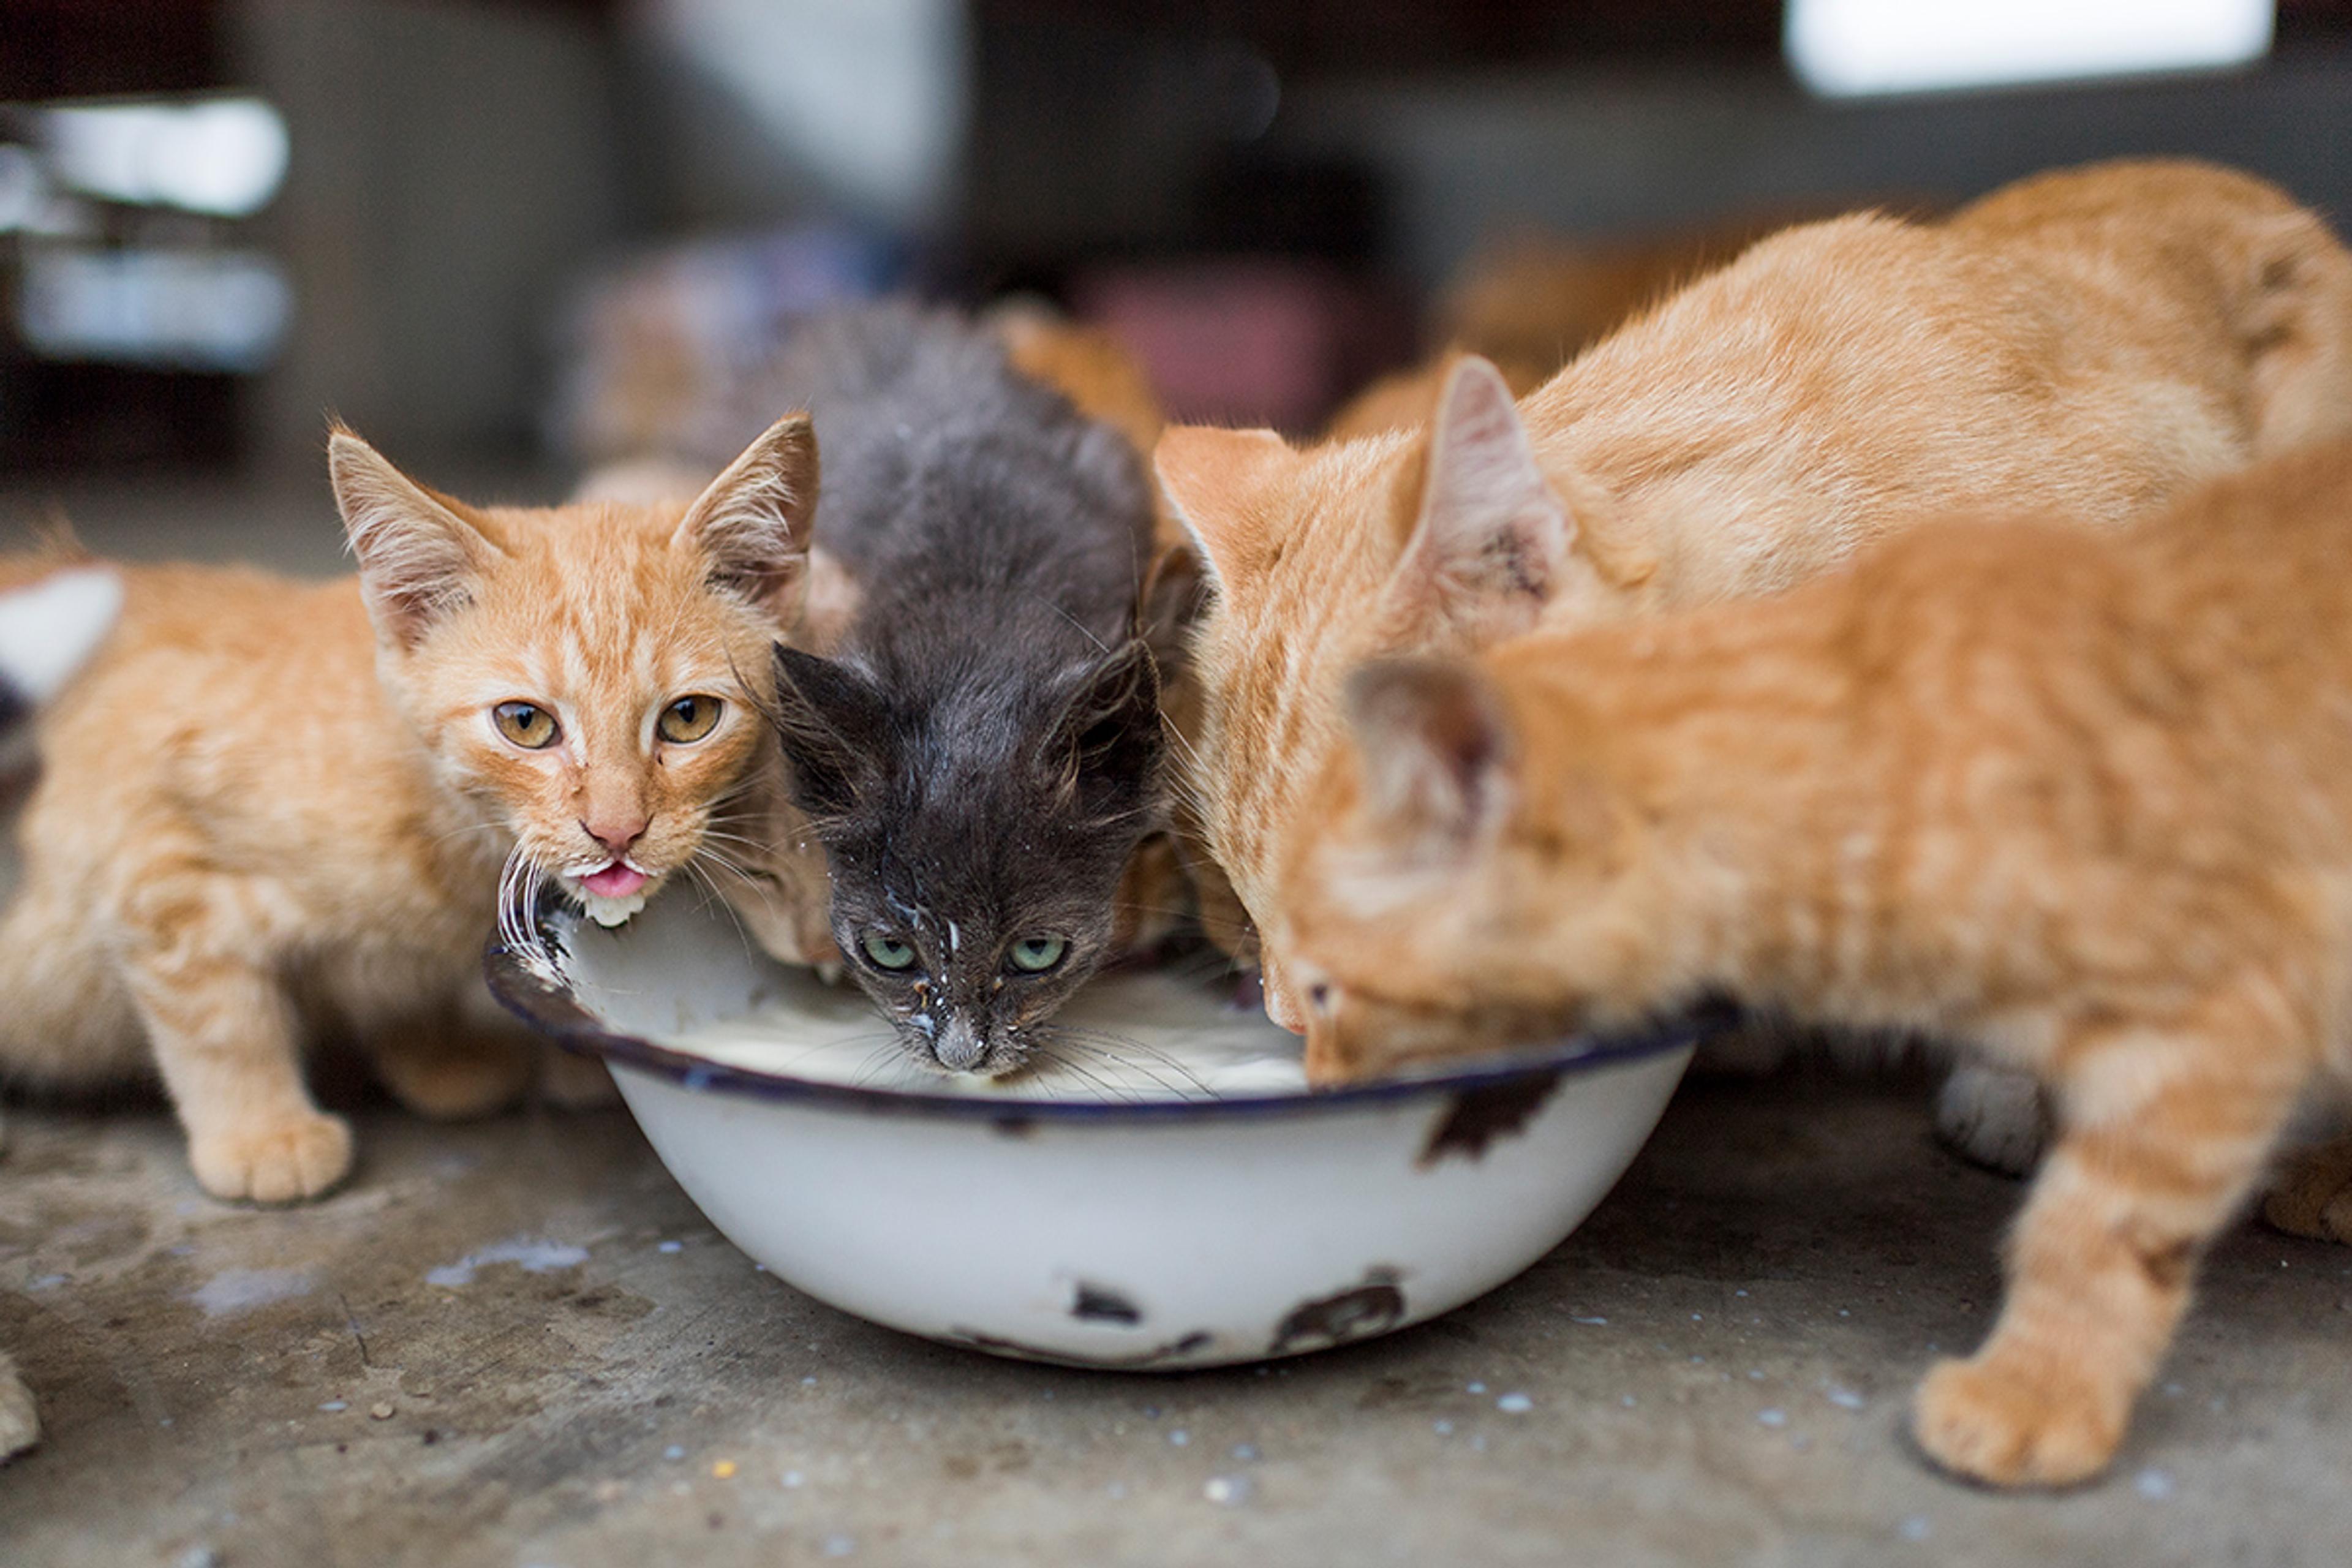 Three yellow cats and one gray cat drink milk from an old white enamel bowl.